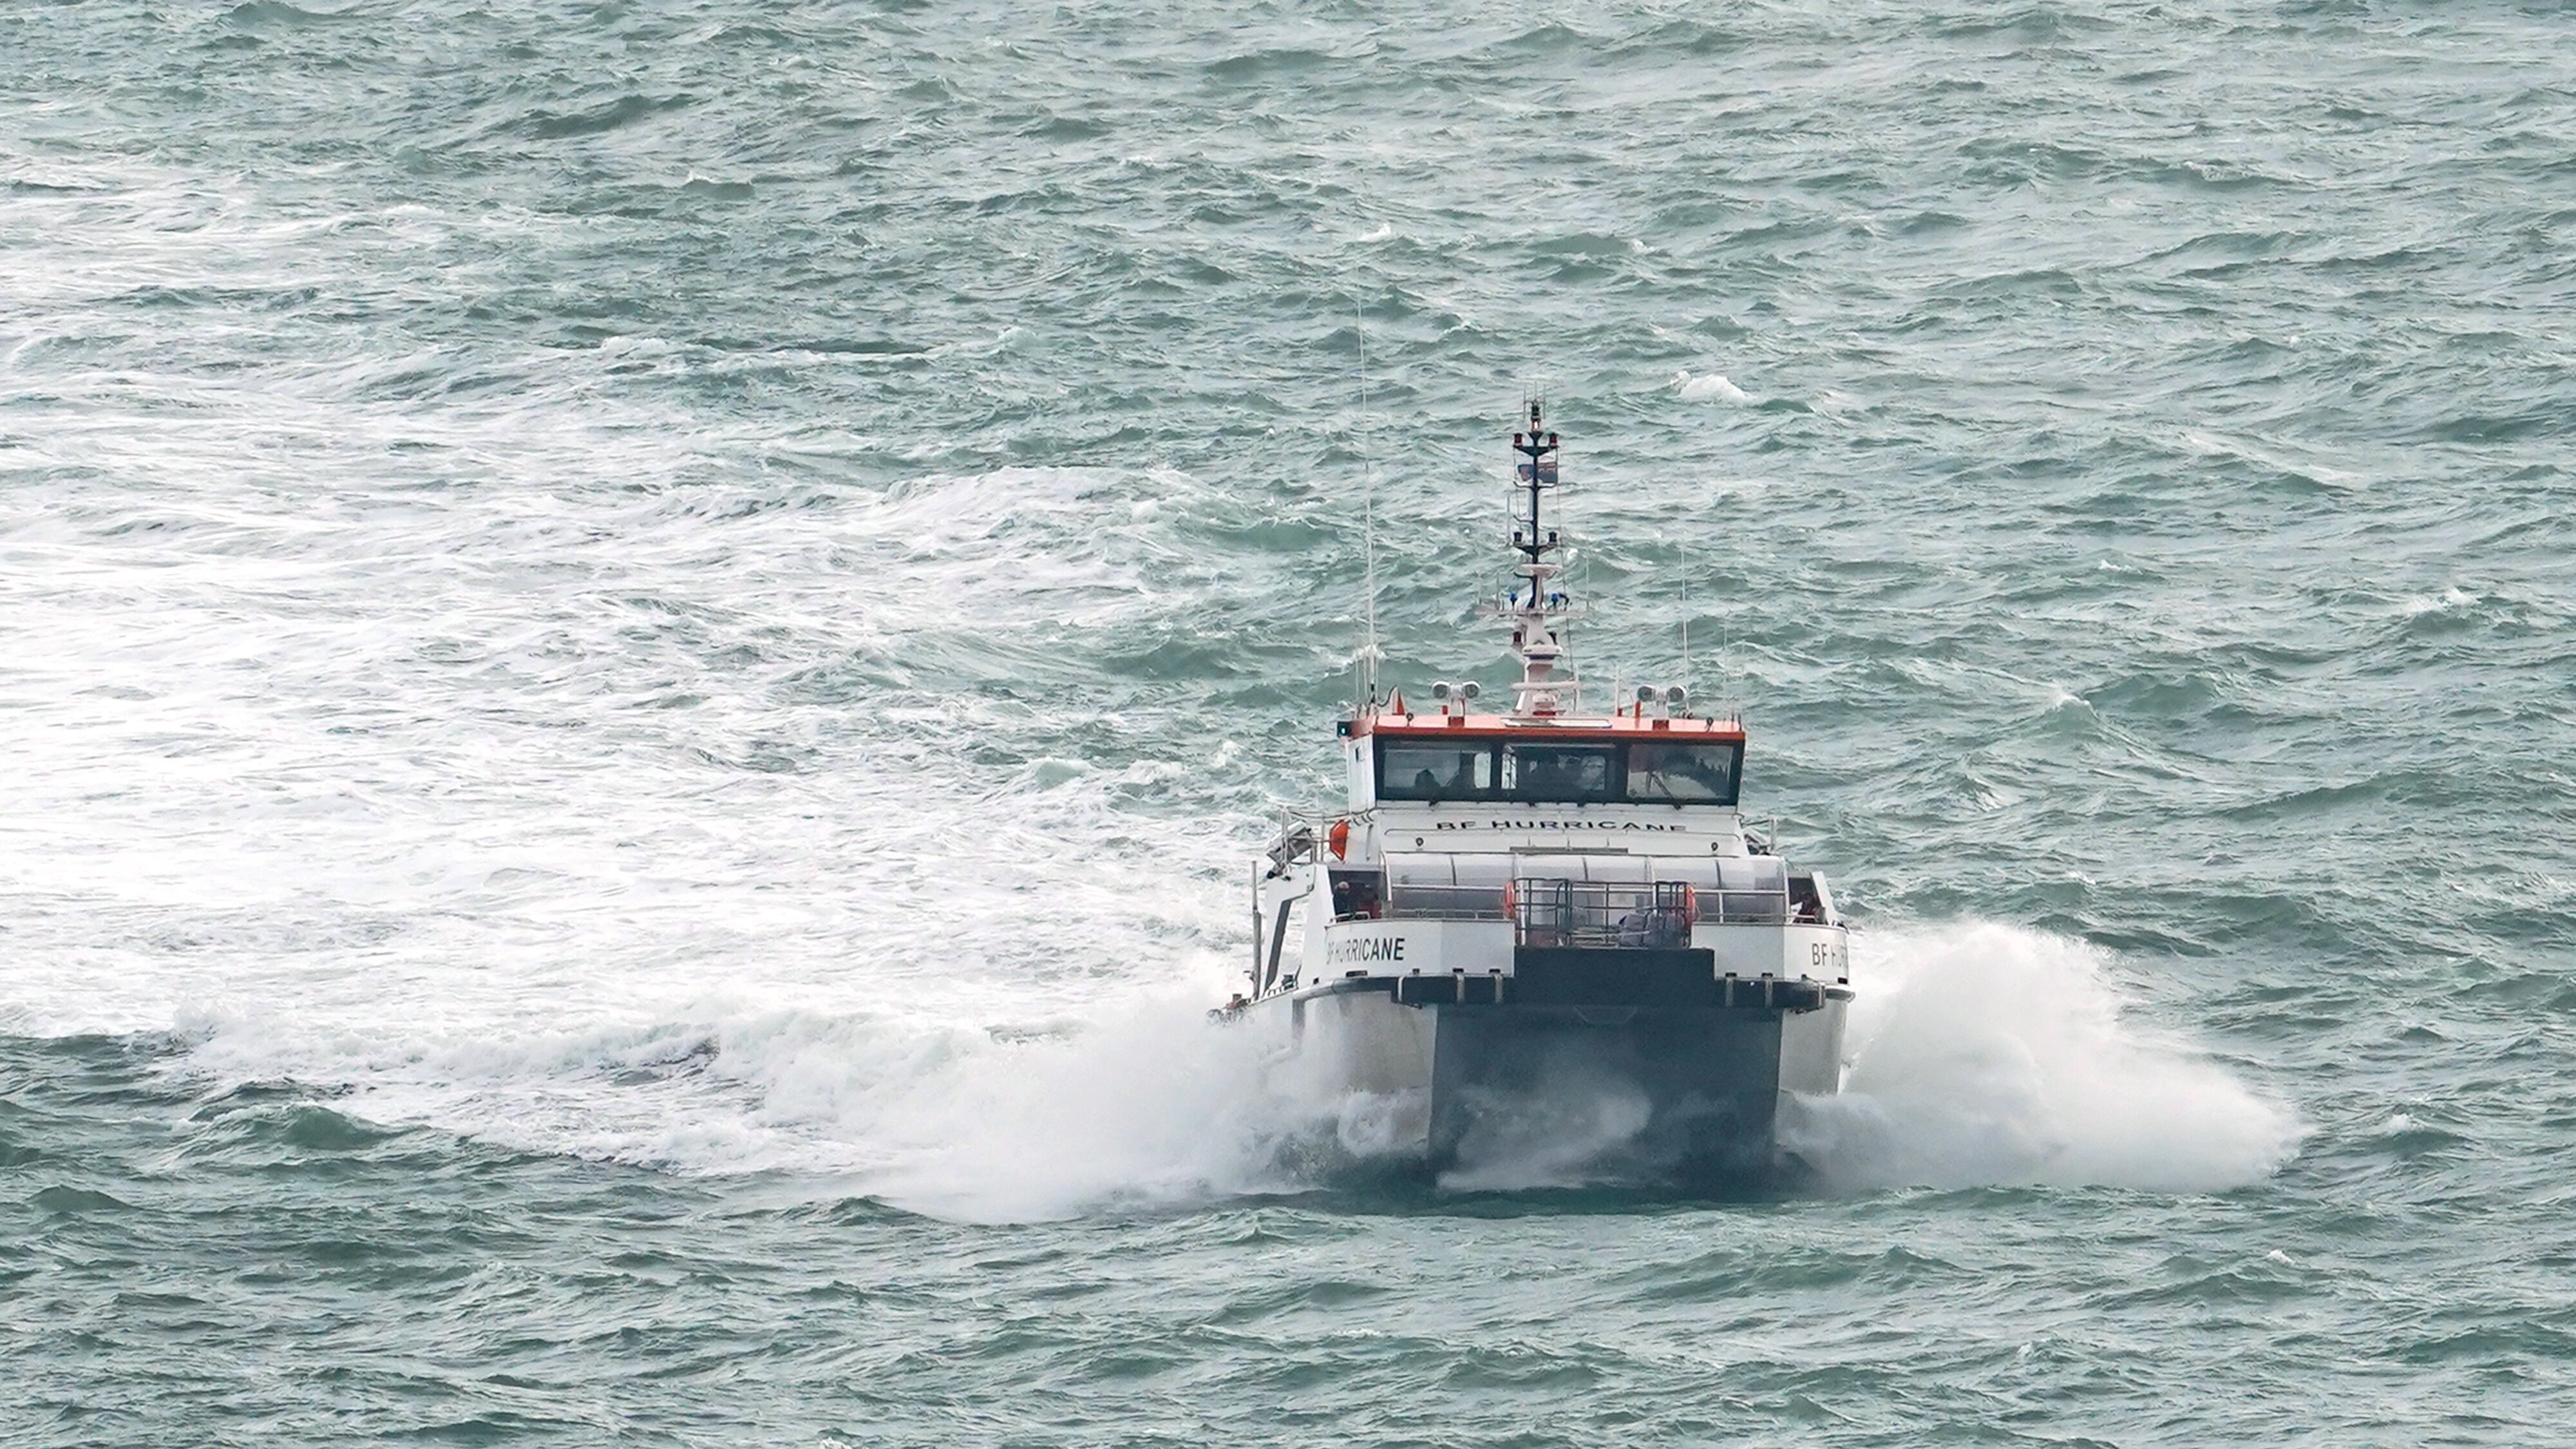 A group of people thought to be migrants are brought in to Dover, Kent, by a Border Force vessel following an earlier small boat incident in the Channel